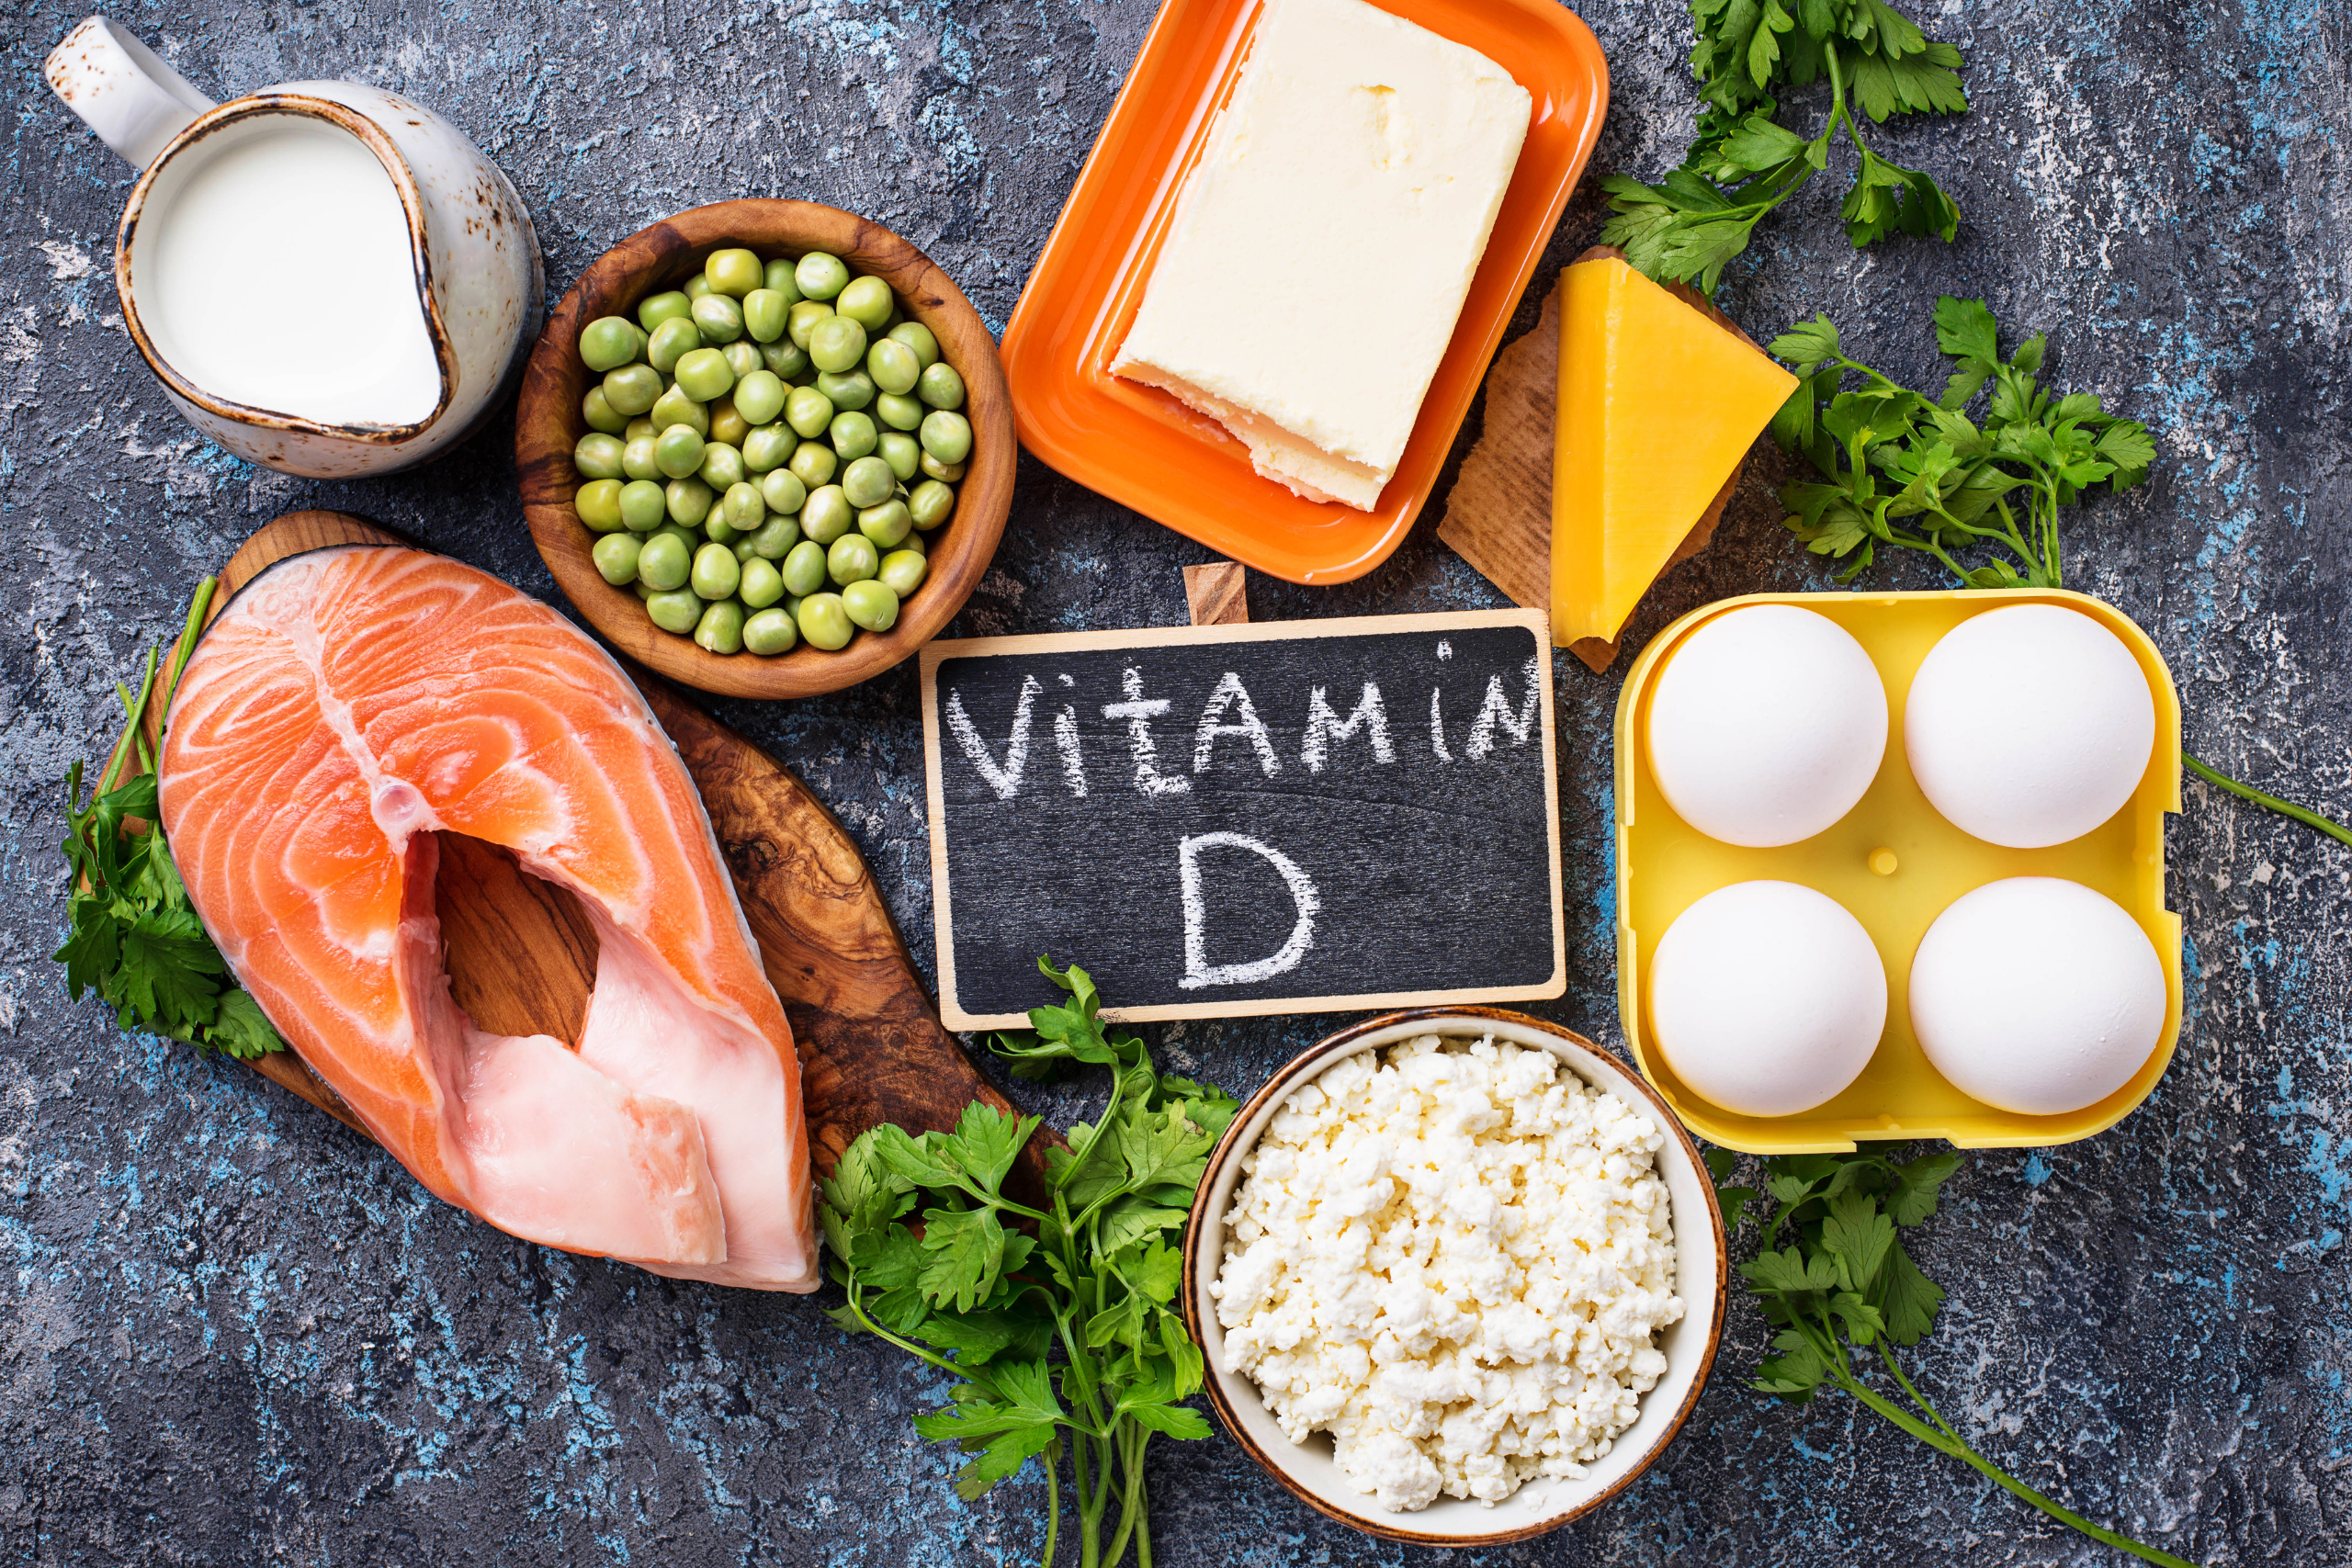 Study Shows Vitamin D is Very Important for Cancer Prevention